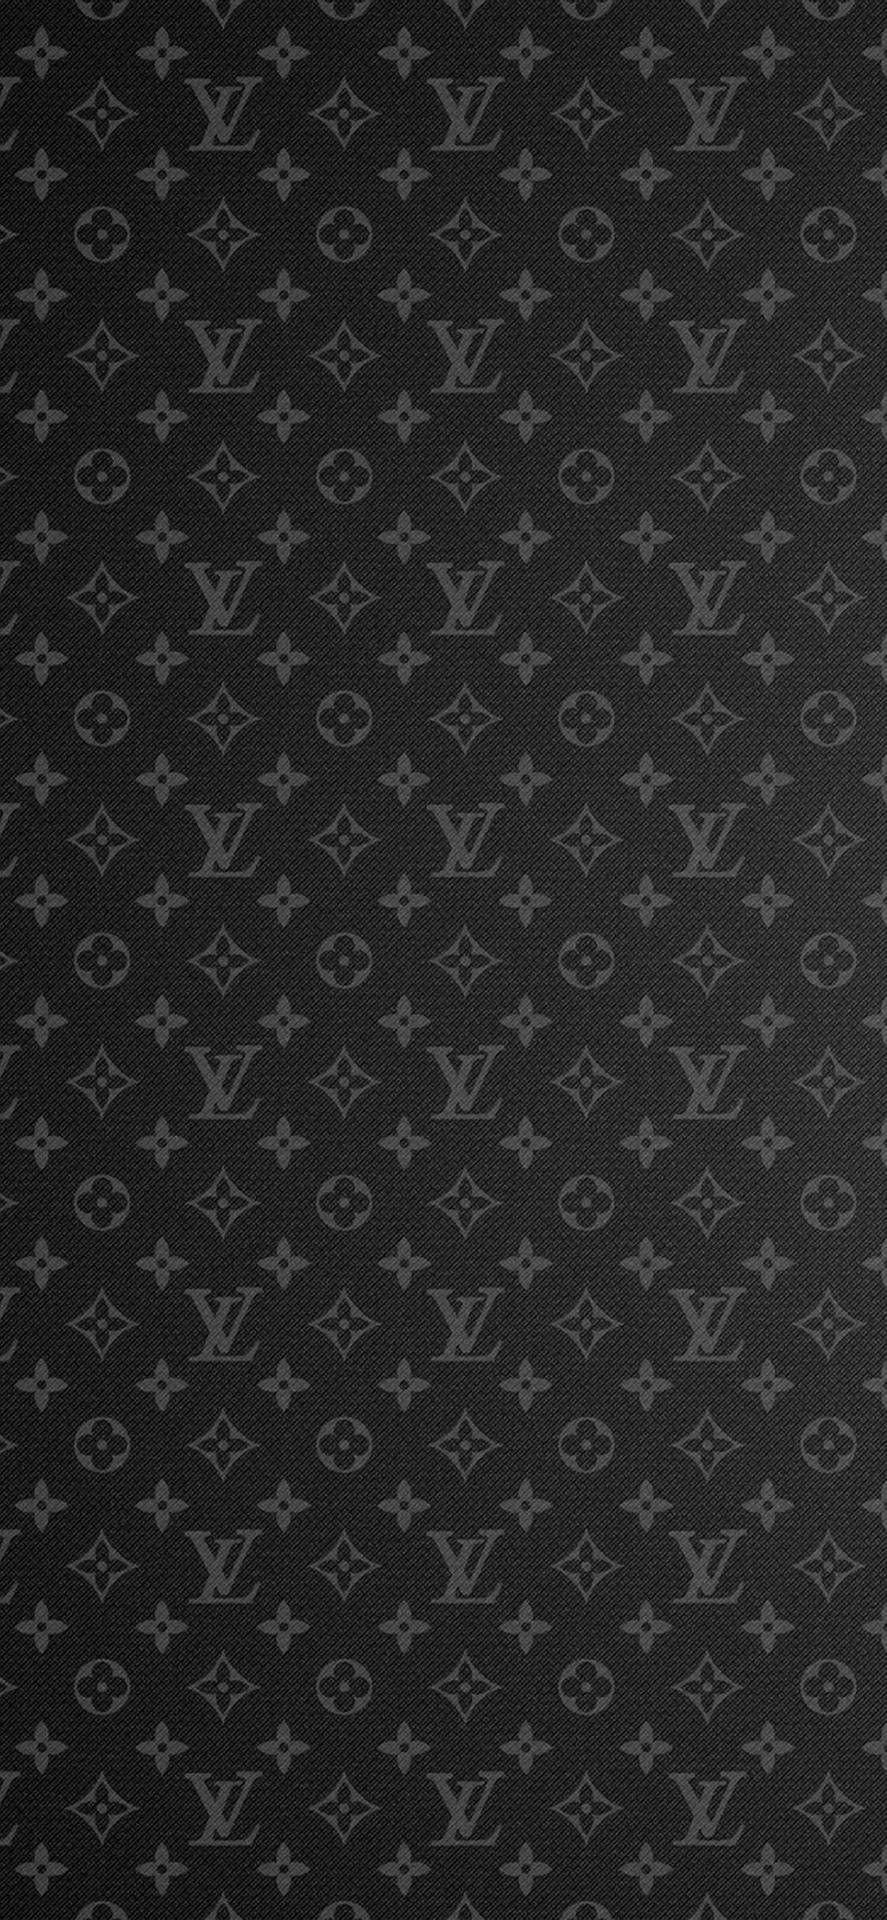 Download Upgrade your wardrobe with Louis Vuitton's stylish and